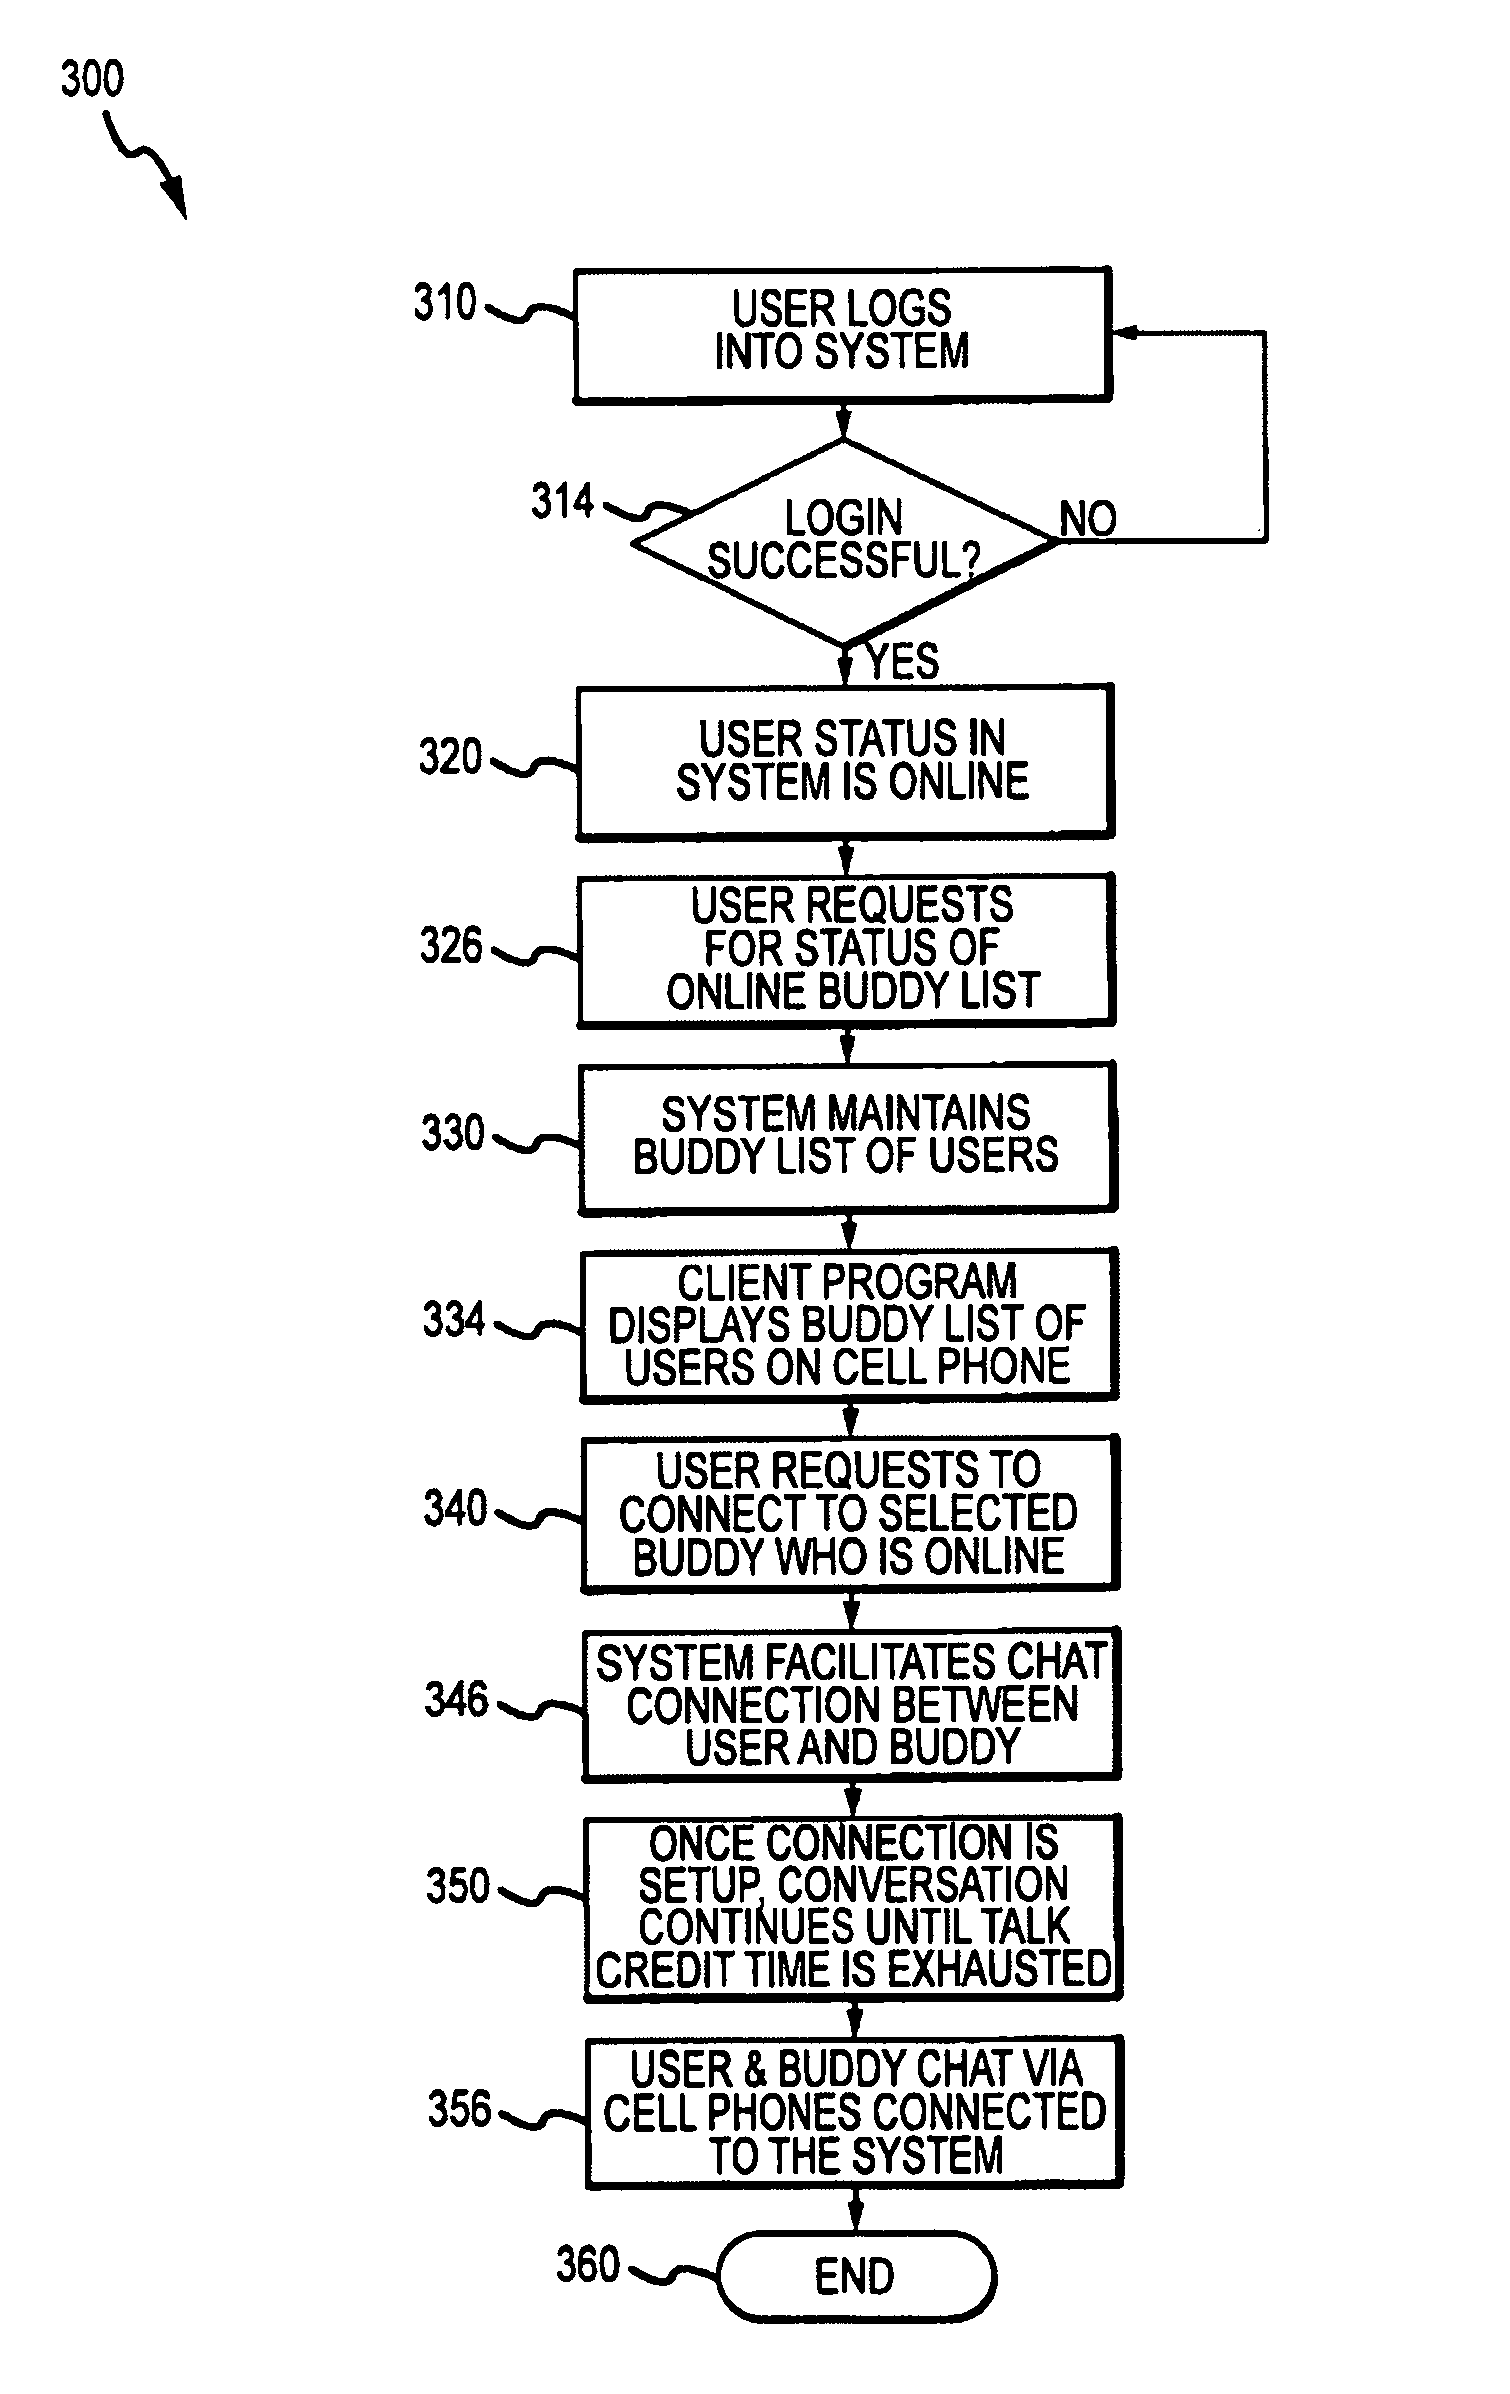 Data communications between short-range enabled wireless devices over networks and proximity marketing to such devices